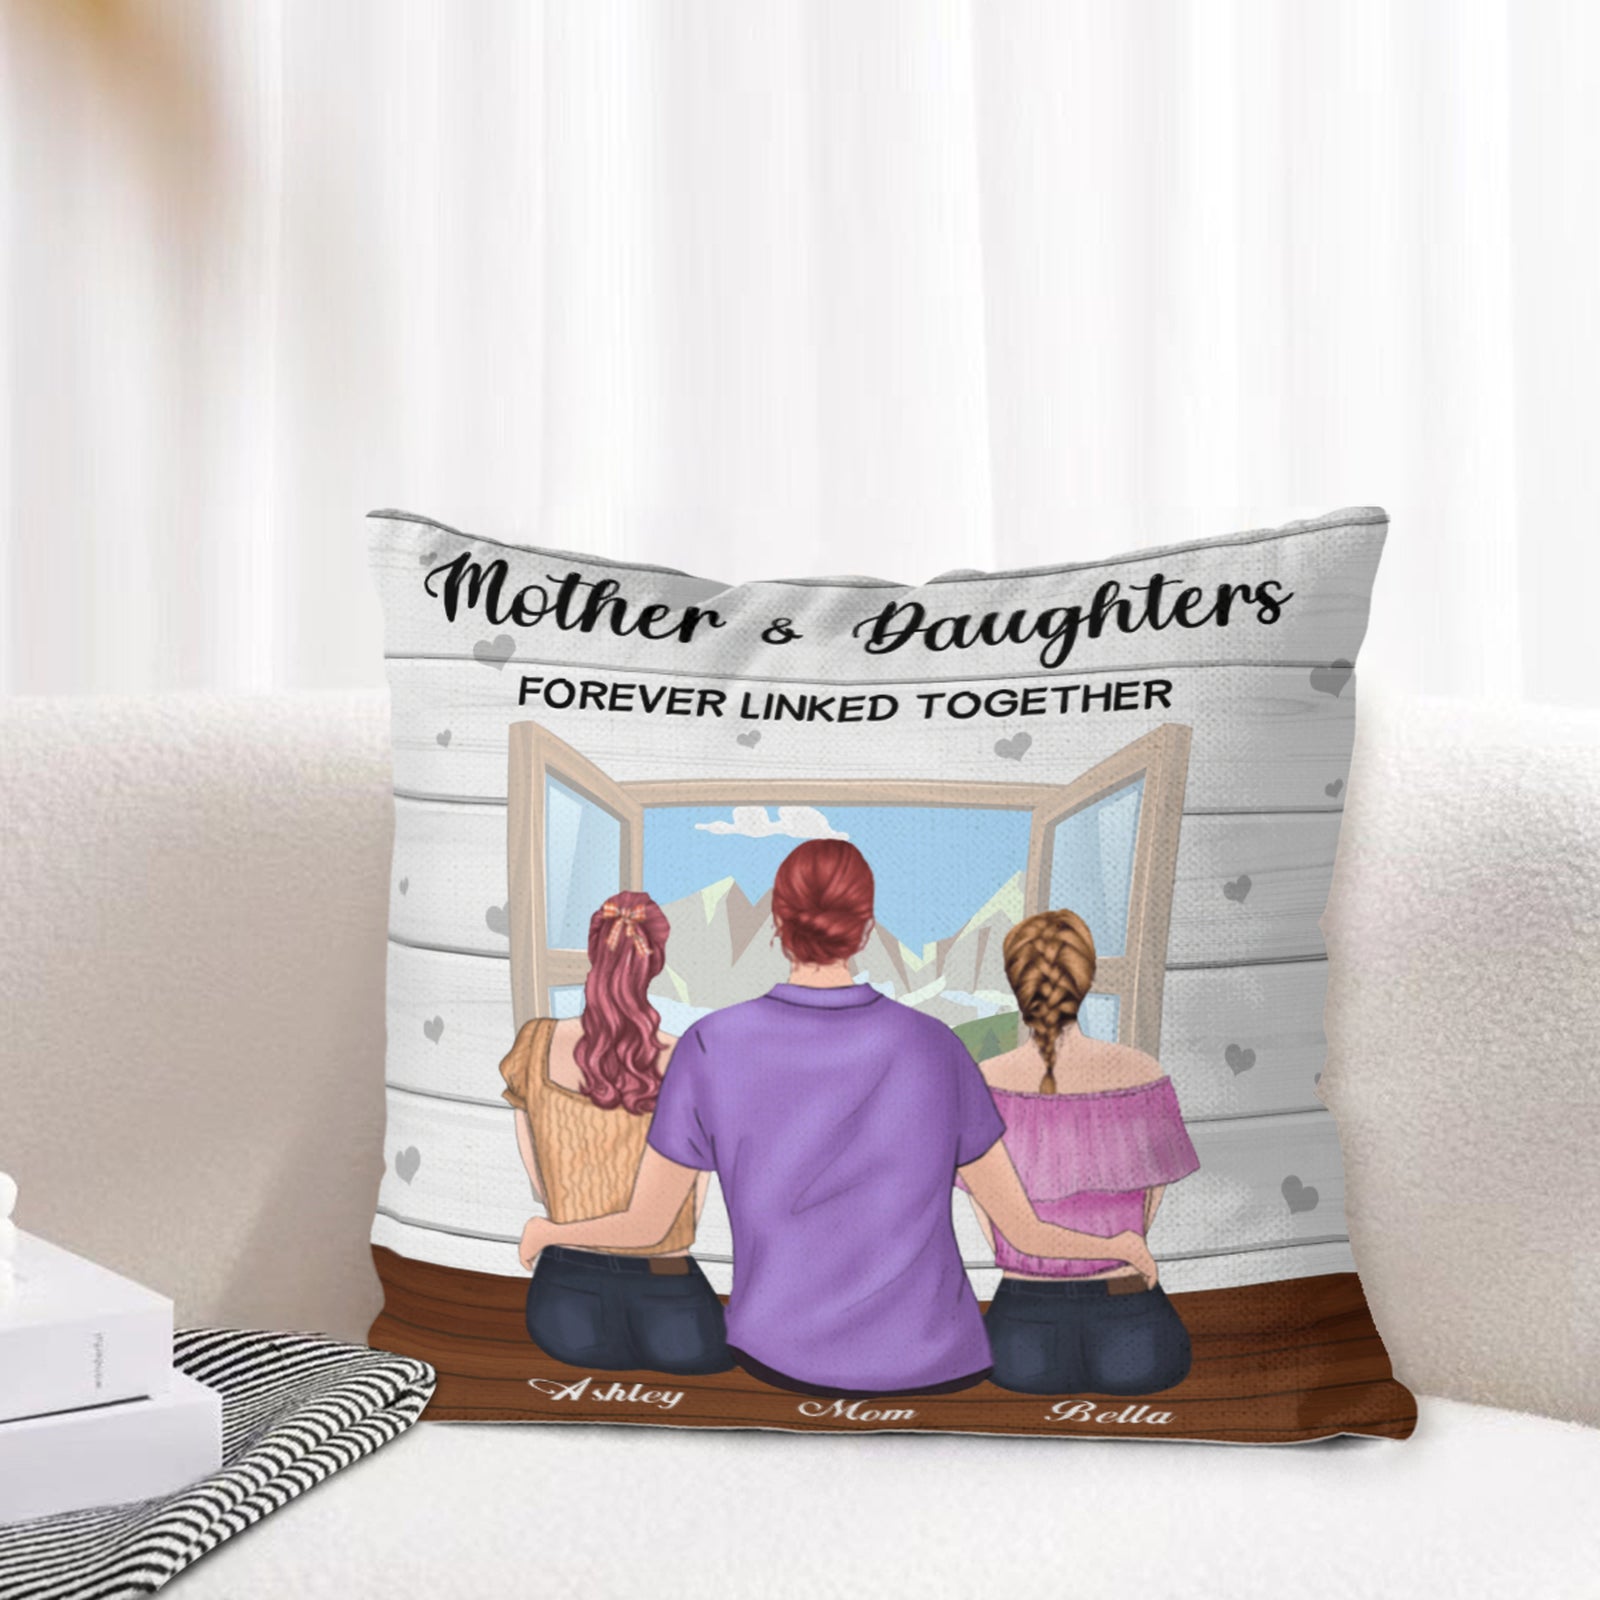 Personalized Pillow Case with Beautiful Pattern, Custom Gifts for Mom, Love Letter Pillow Case for Mom, Beautiful Home Decor Gifts - colorfulcustom